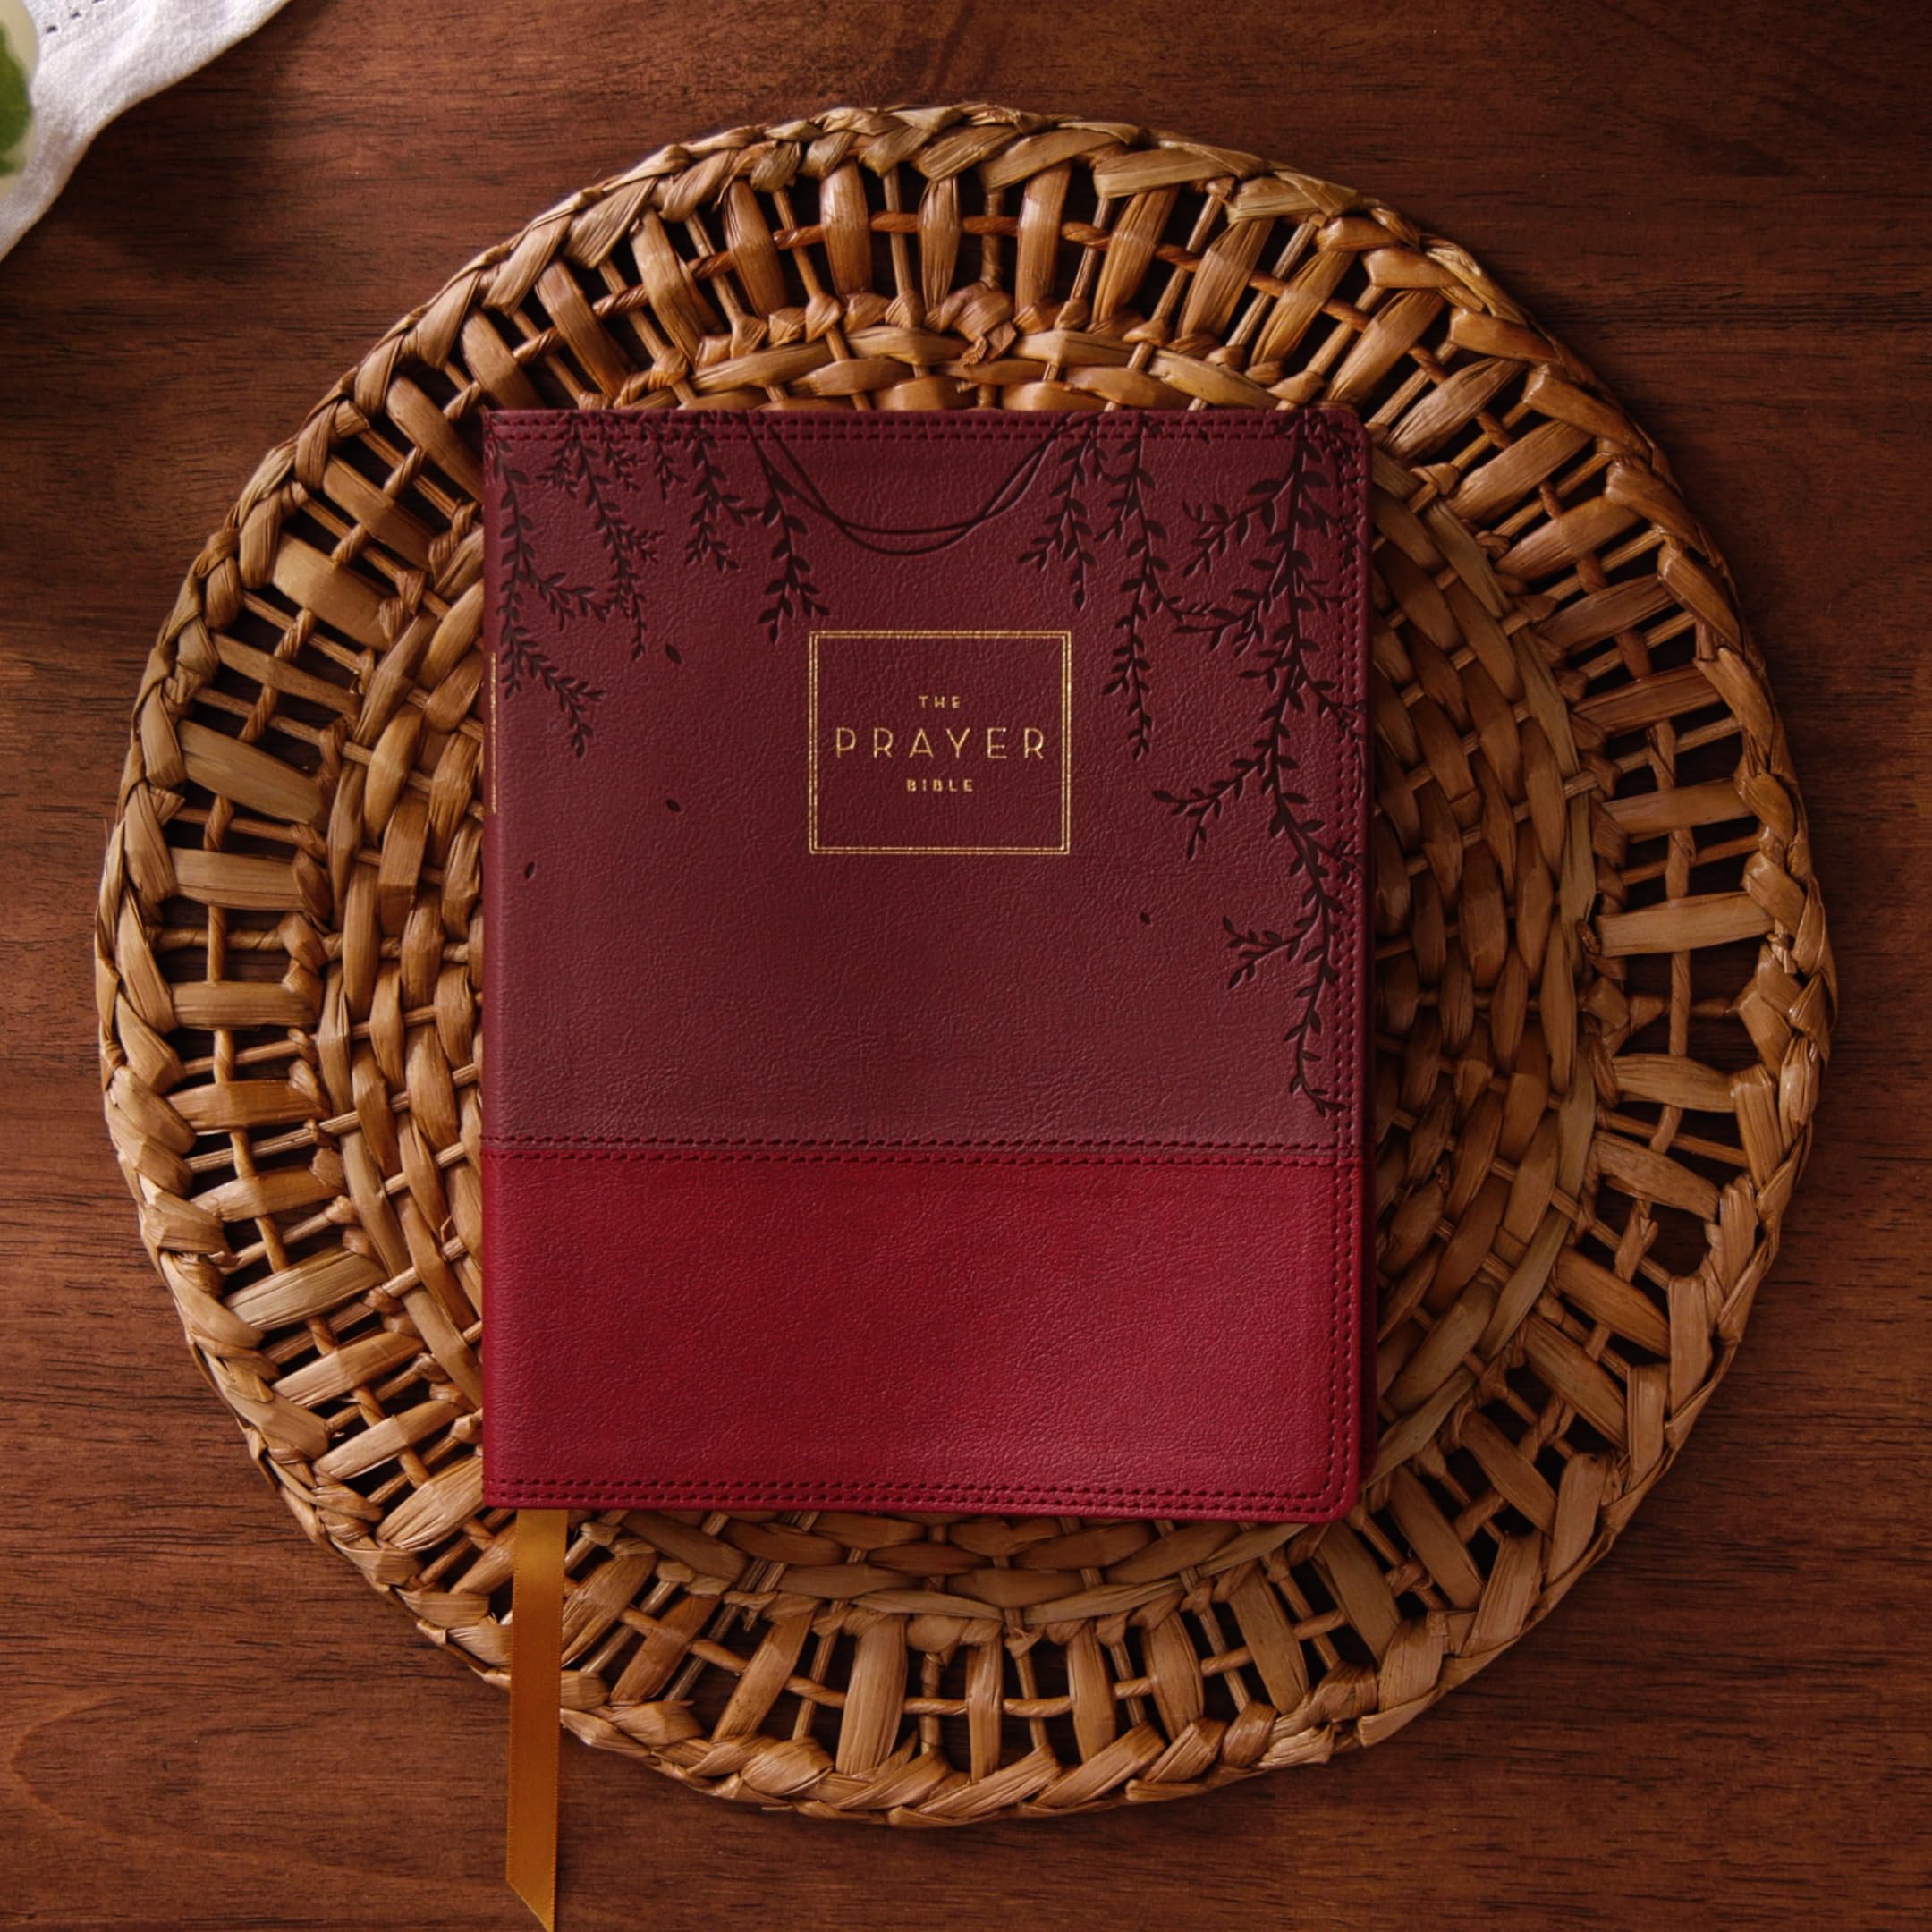 The Prayer Bible: Pray God’s Word Cover to Cover (NKJV, Burgundy Leathersoft, Red Letter, Comfort Print)